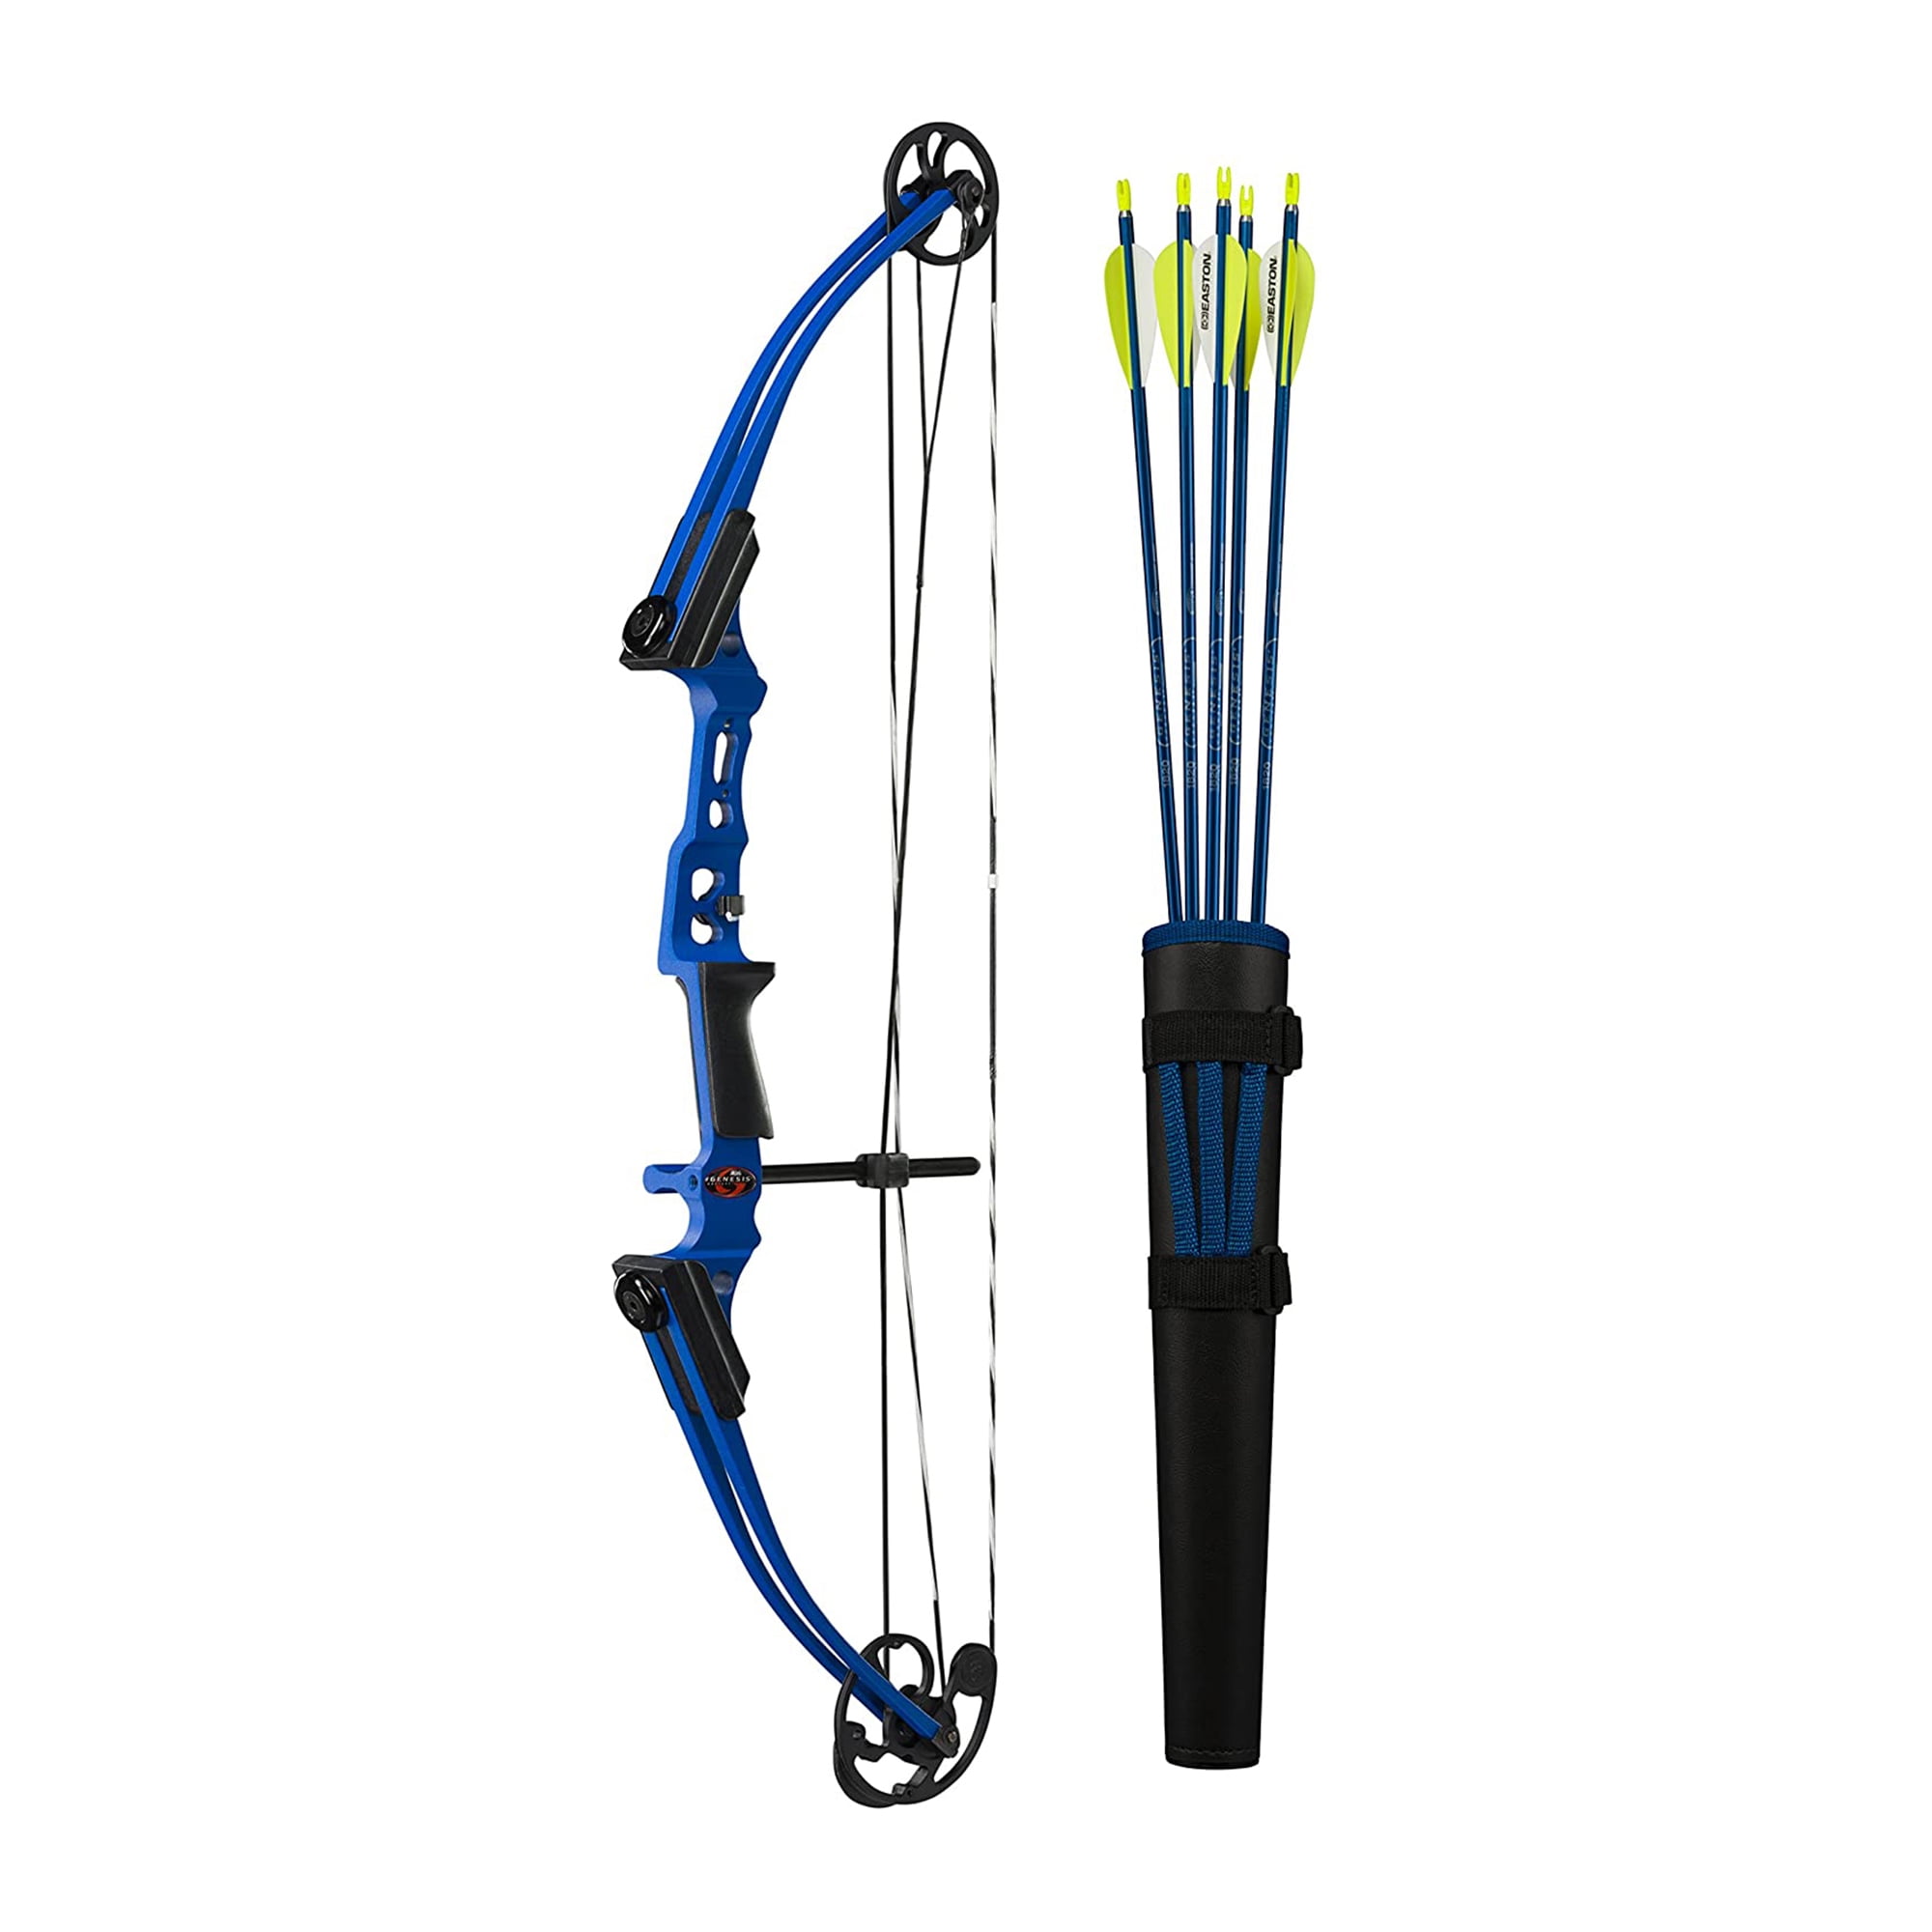 14" Mini Compound Bow Set Laser Sight 25lbs Archery Fishing Hunting Shooting 